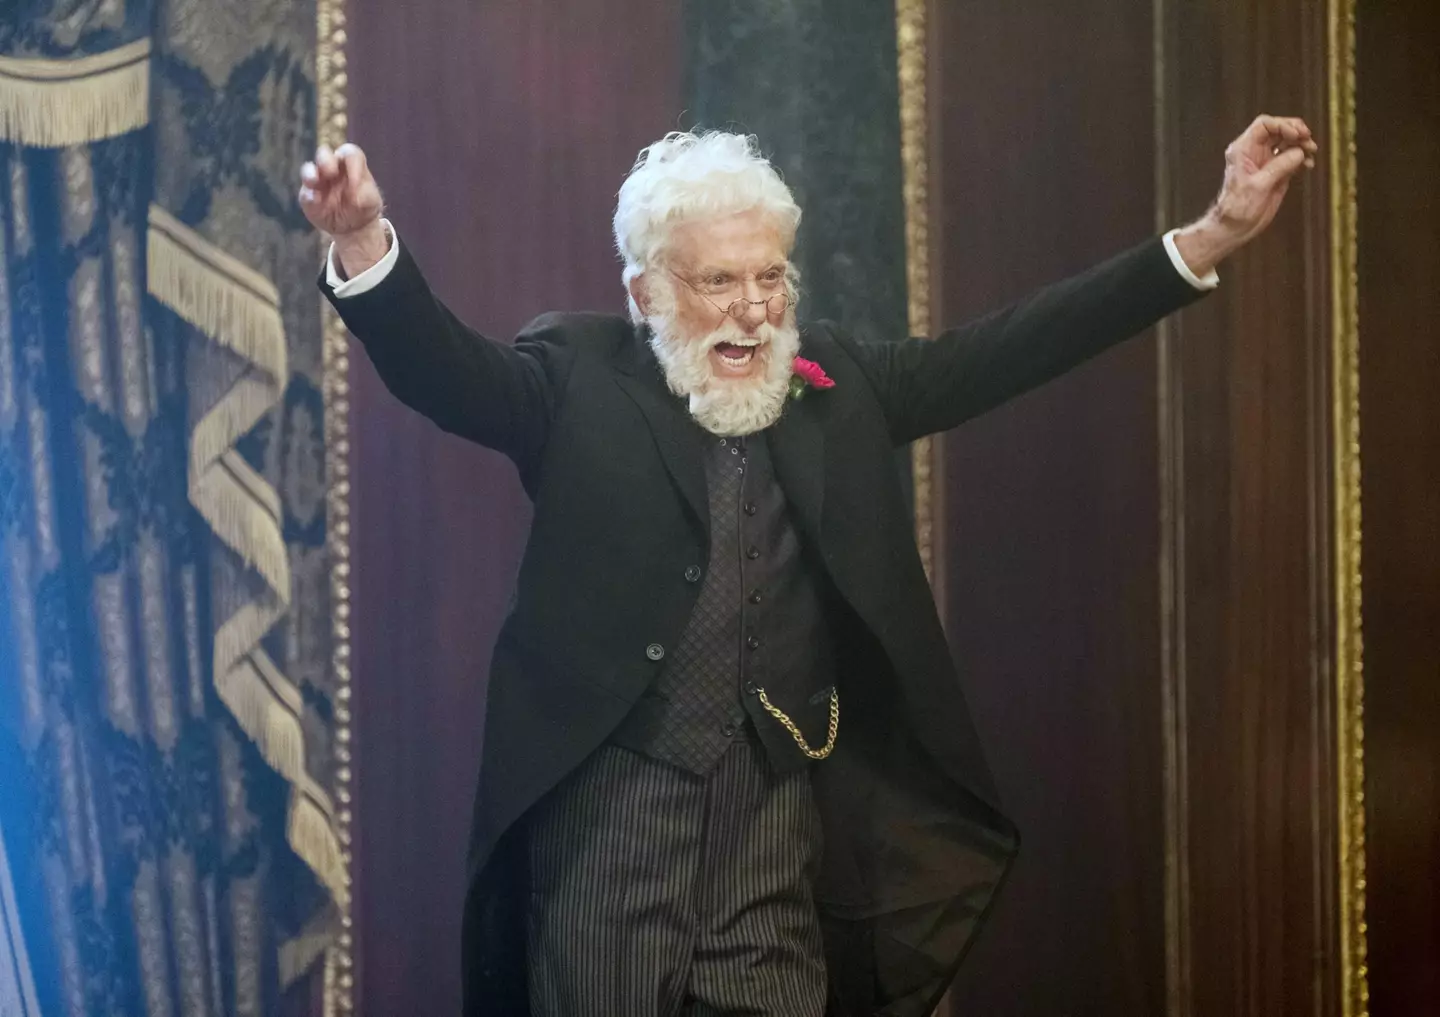 The icon proved he still had it in his 90s by dancing in Mary Poppins Returns.